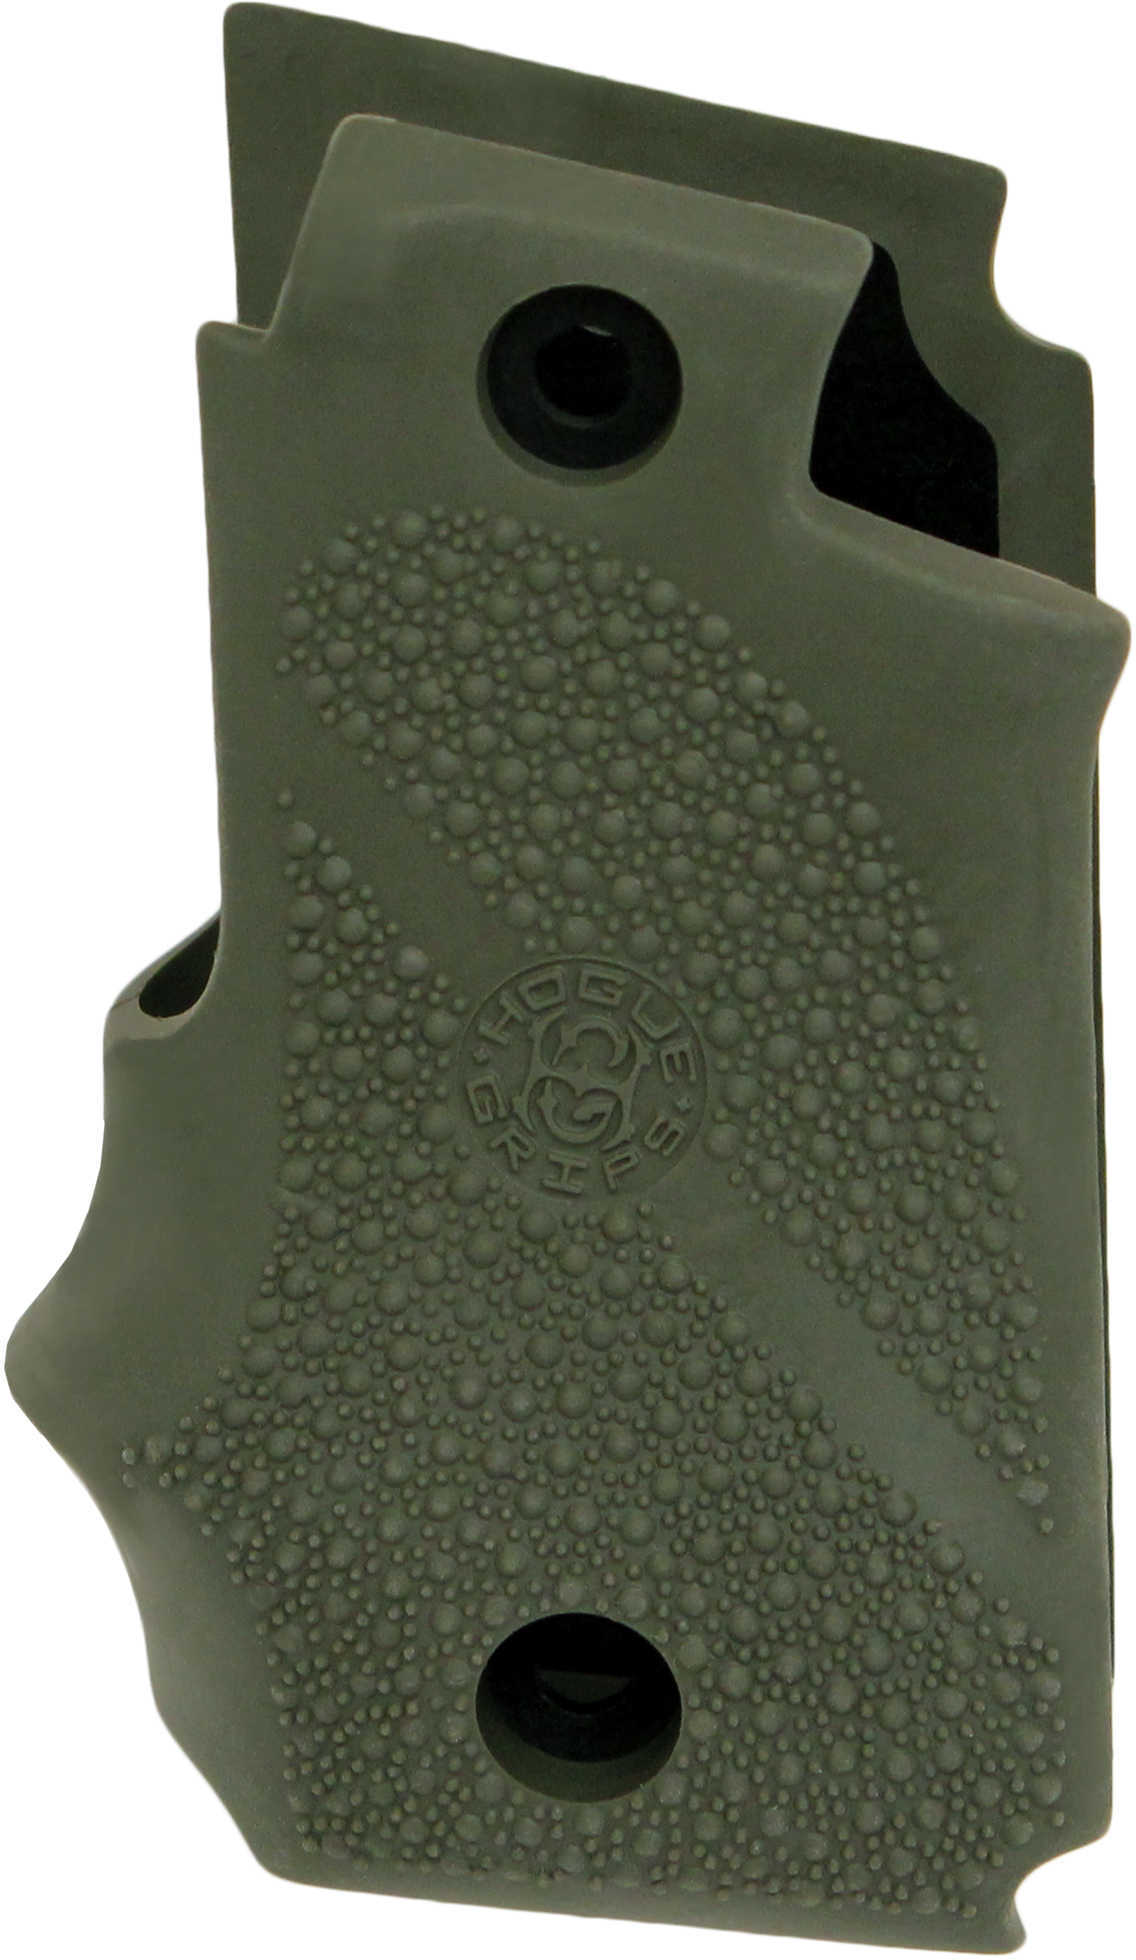 Hogue Sig P238 Grips Rubber w/Finger Grooves Olive Drab Green 38001